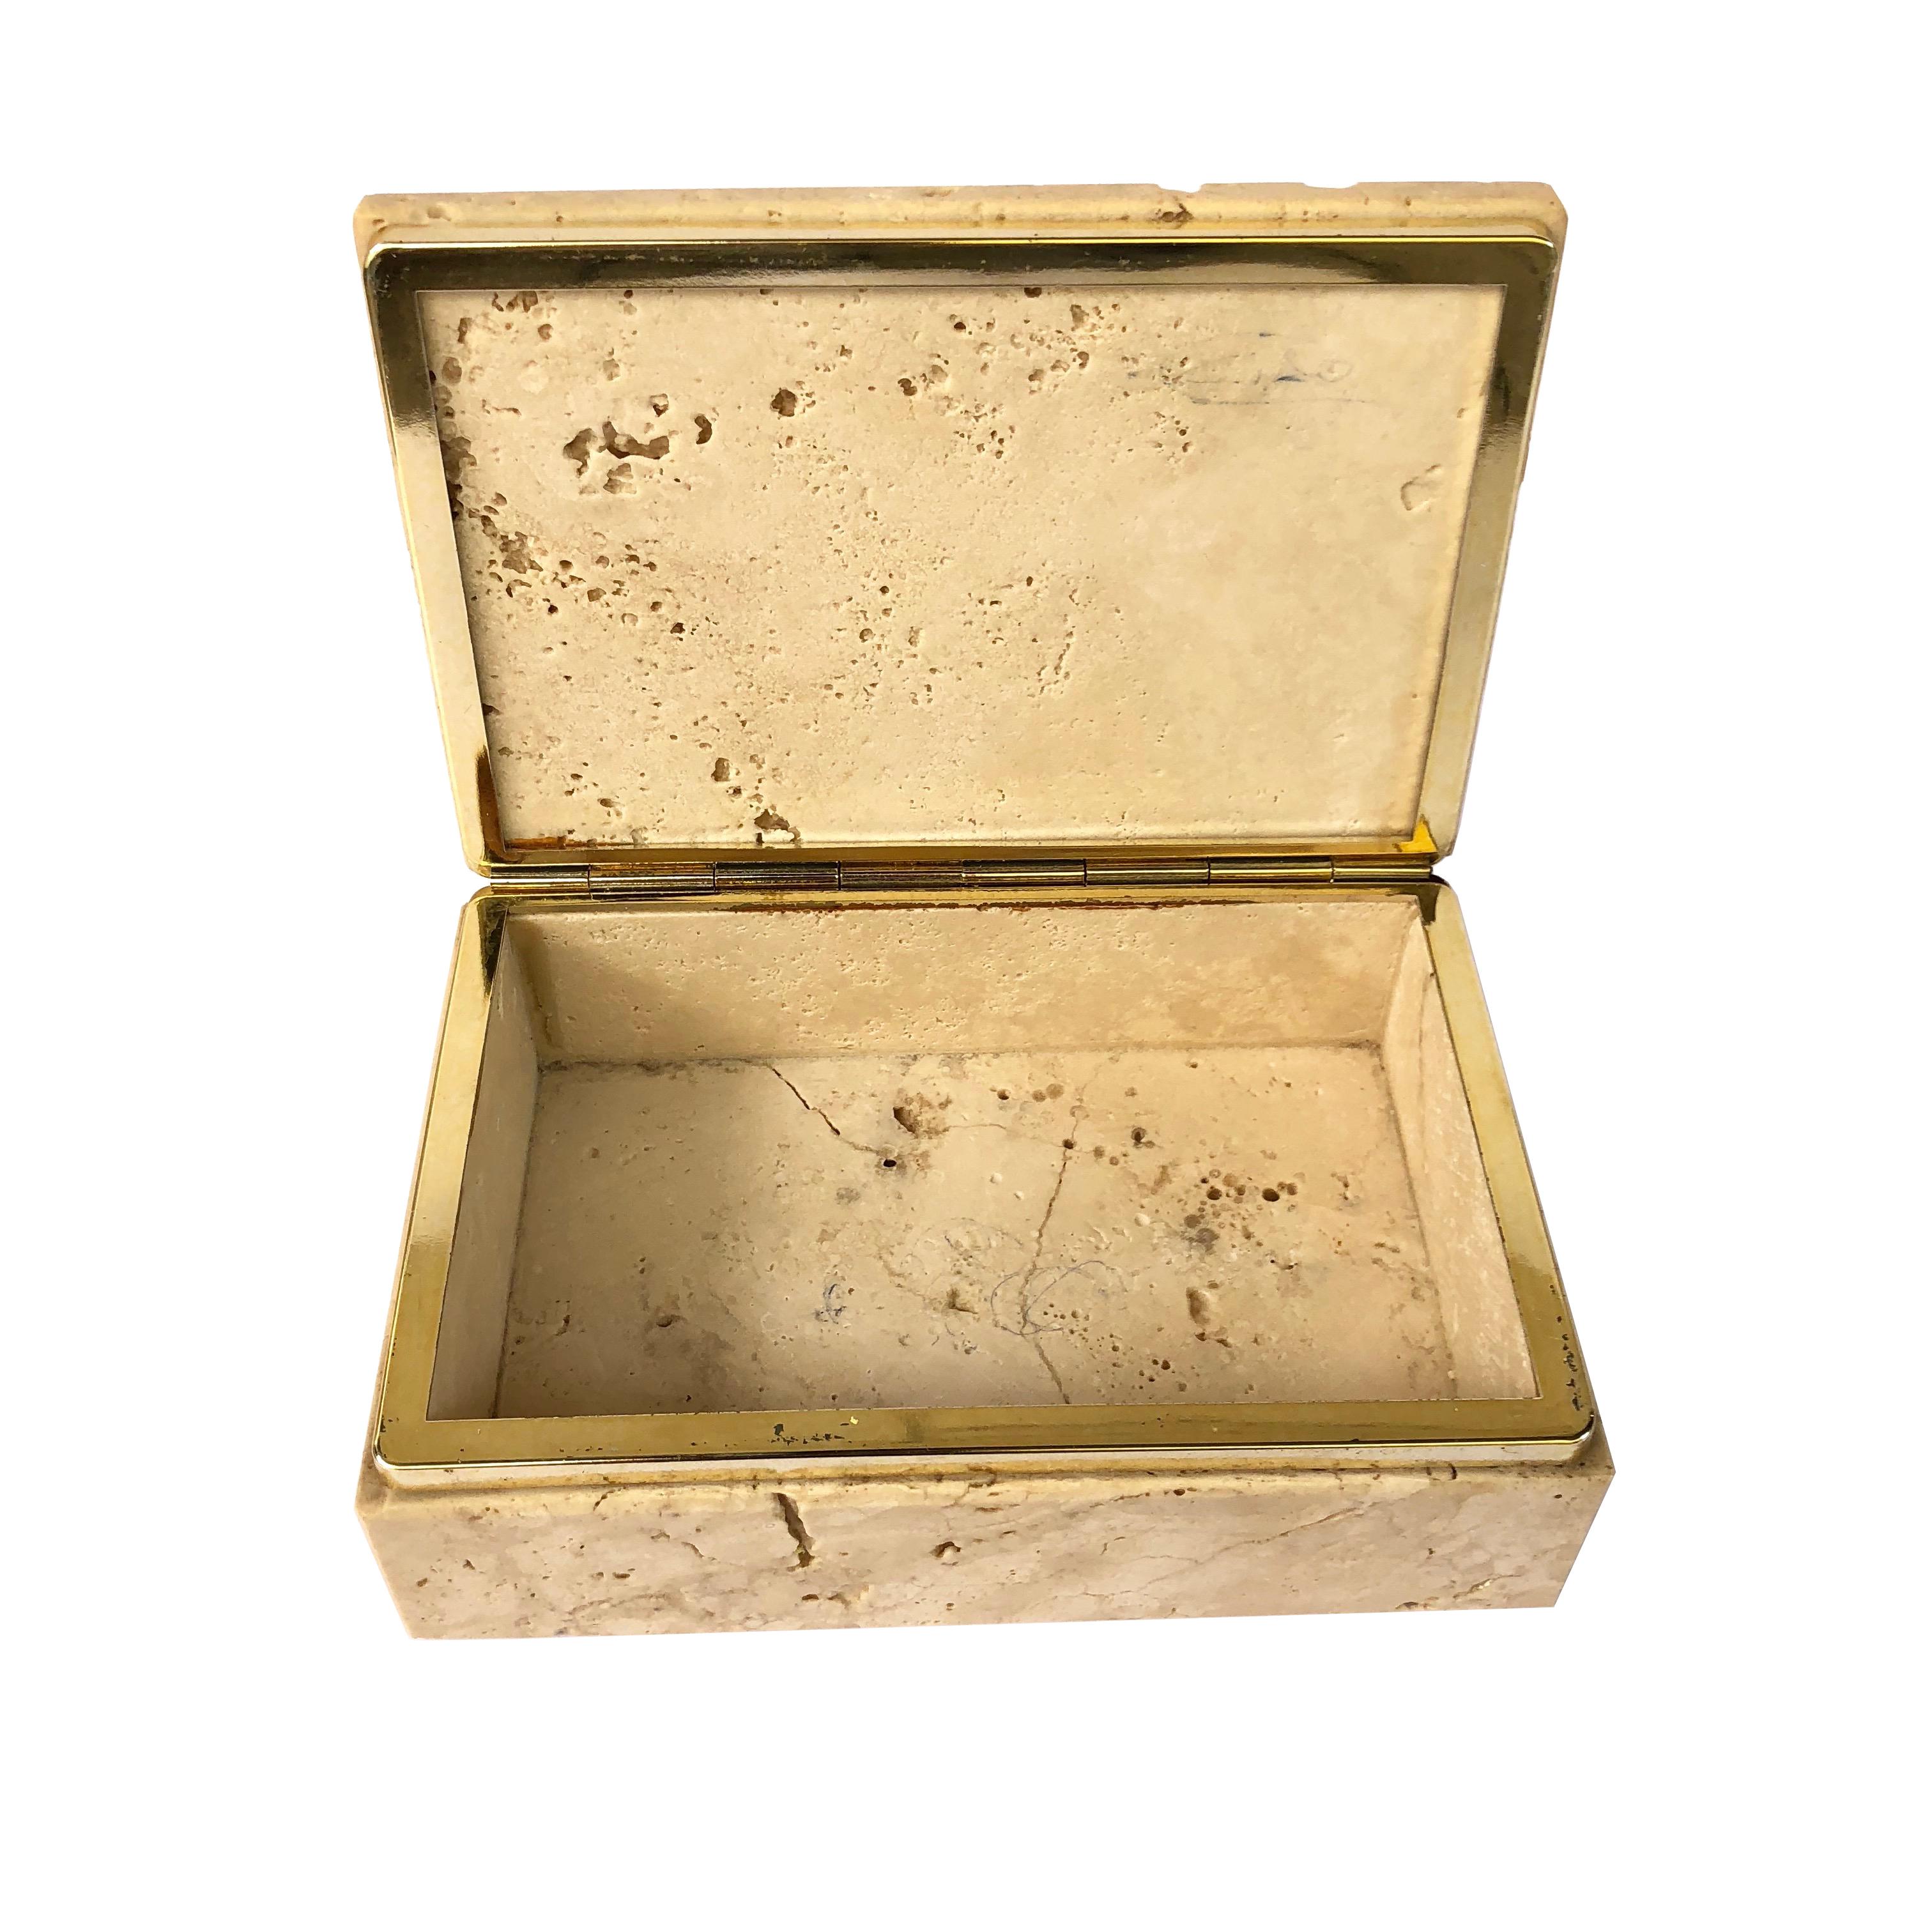 Organic Modern Travertine and Brass Hinged Box in Organic Style Attributed to Fratelli Mannelli